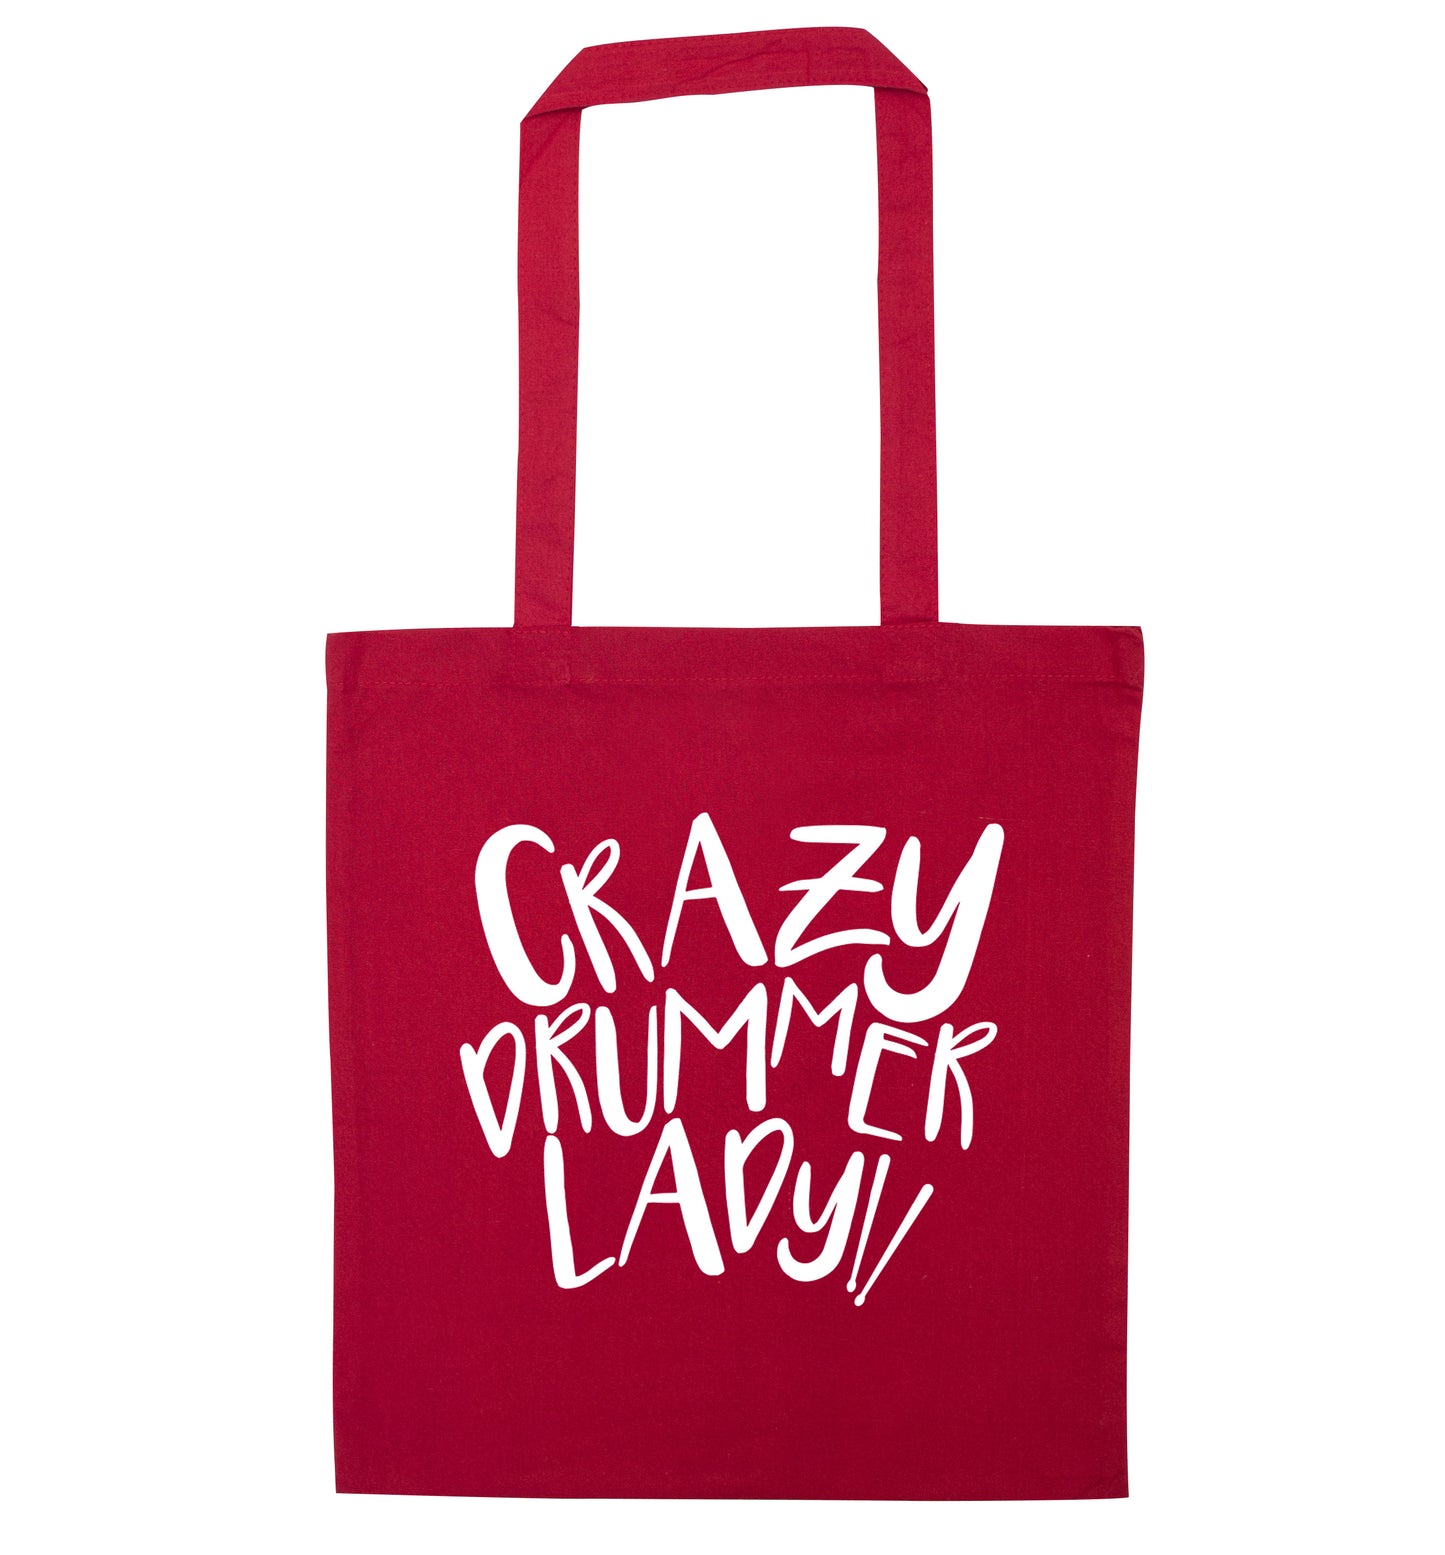 Crazy drummer lady red tote bag